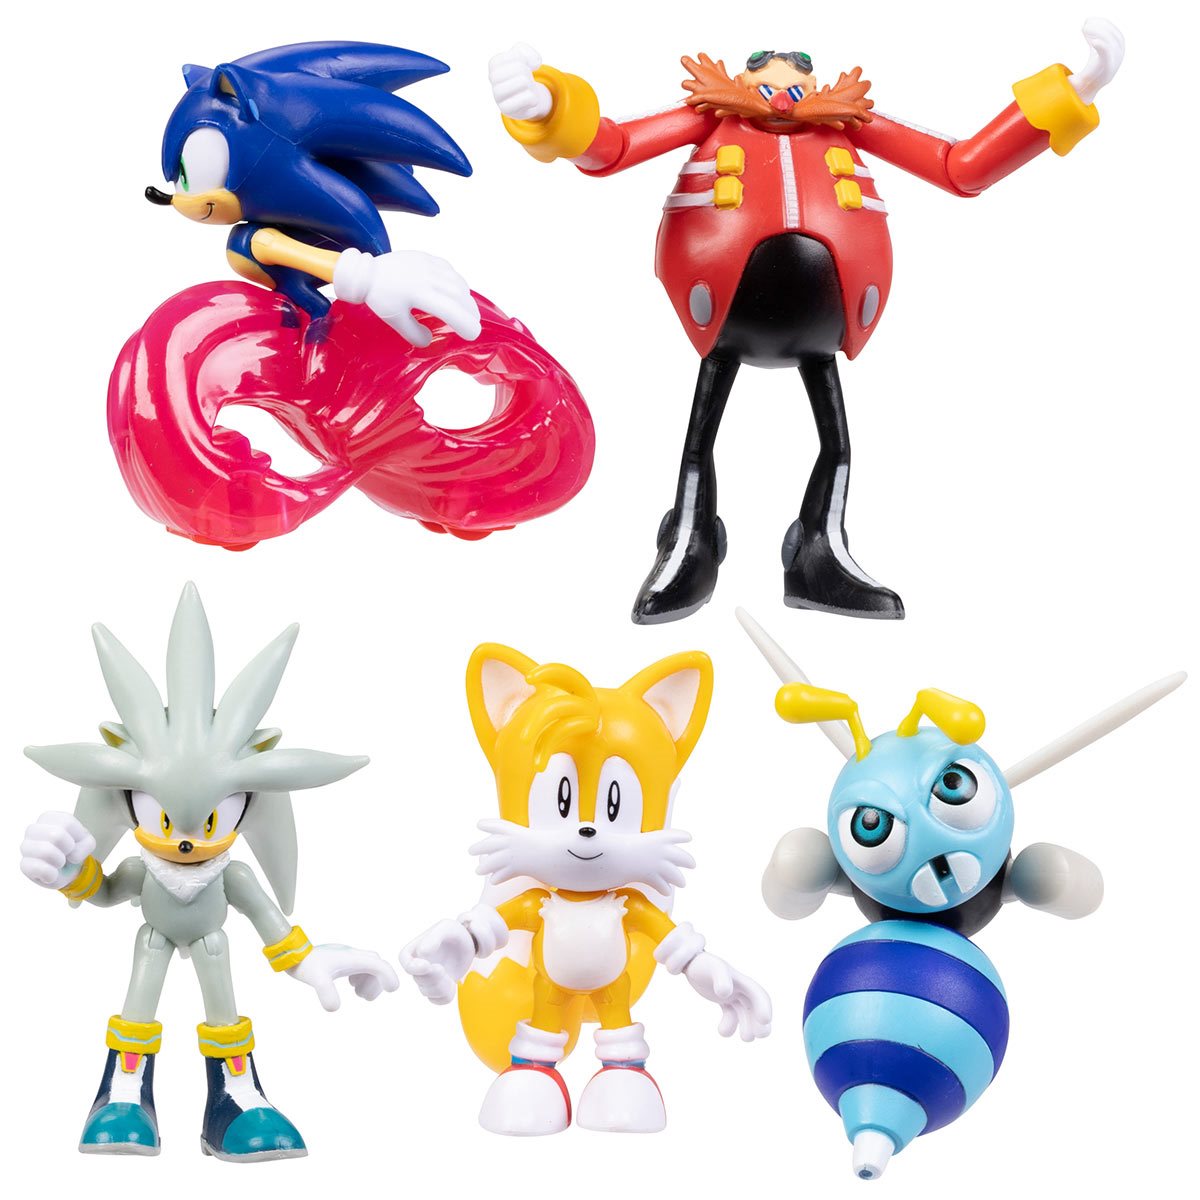 Sonic the Hedgehog 2 1/2-Inch Action Figures Wave 10 Case of 12